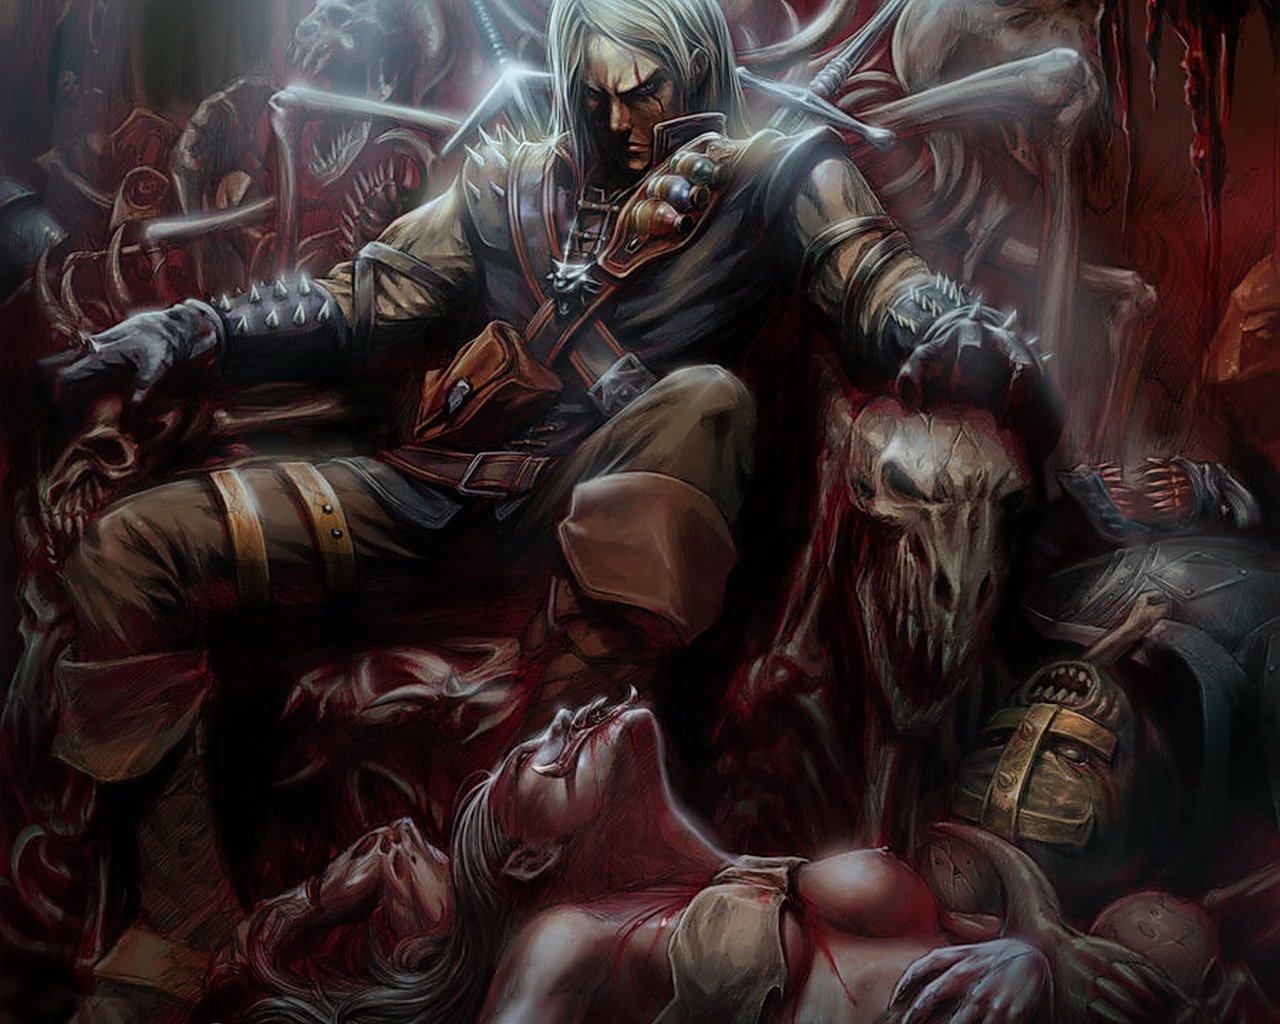 Slayer Witcher The From Warriorspx 1280x1024 pixel Popular HD